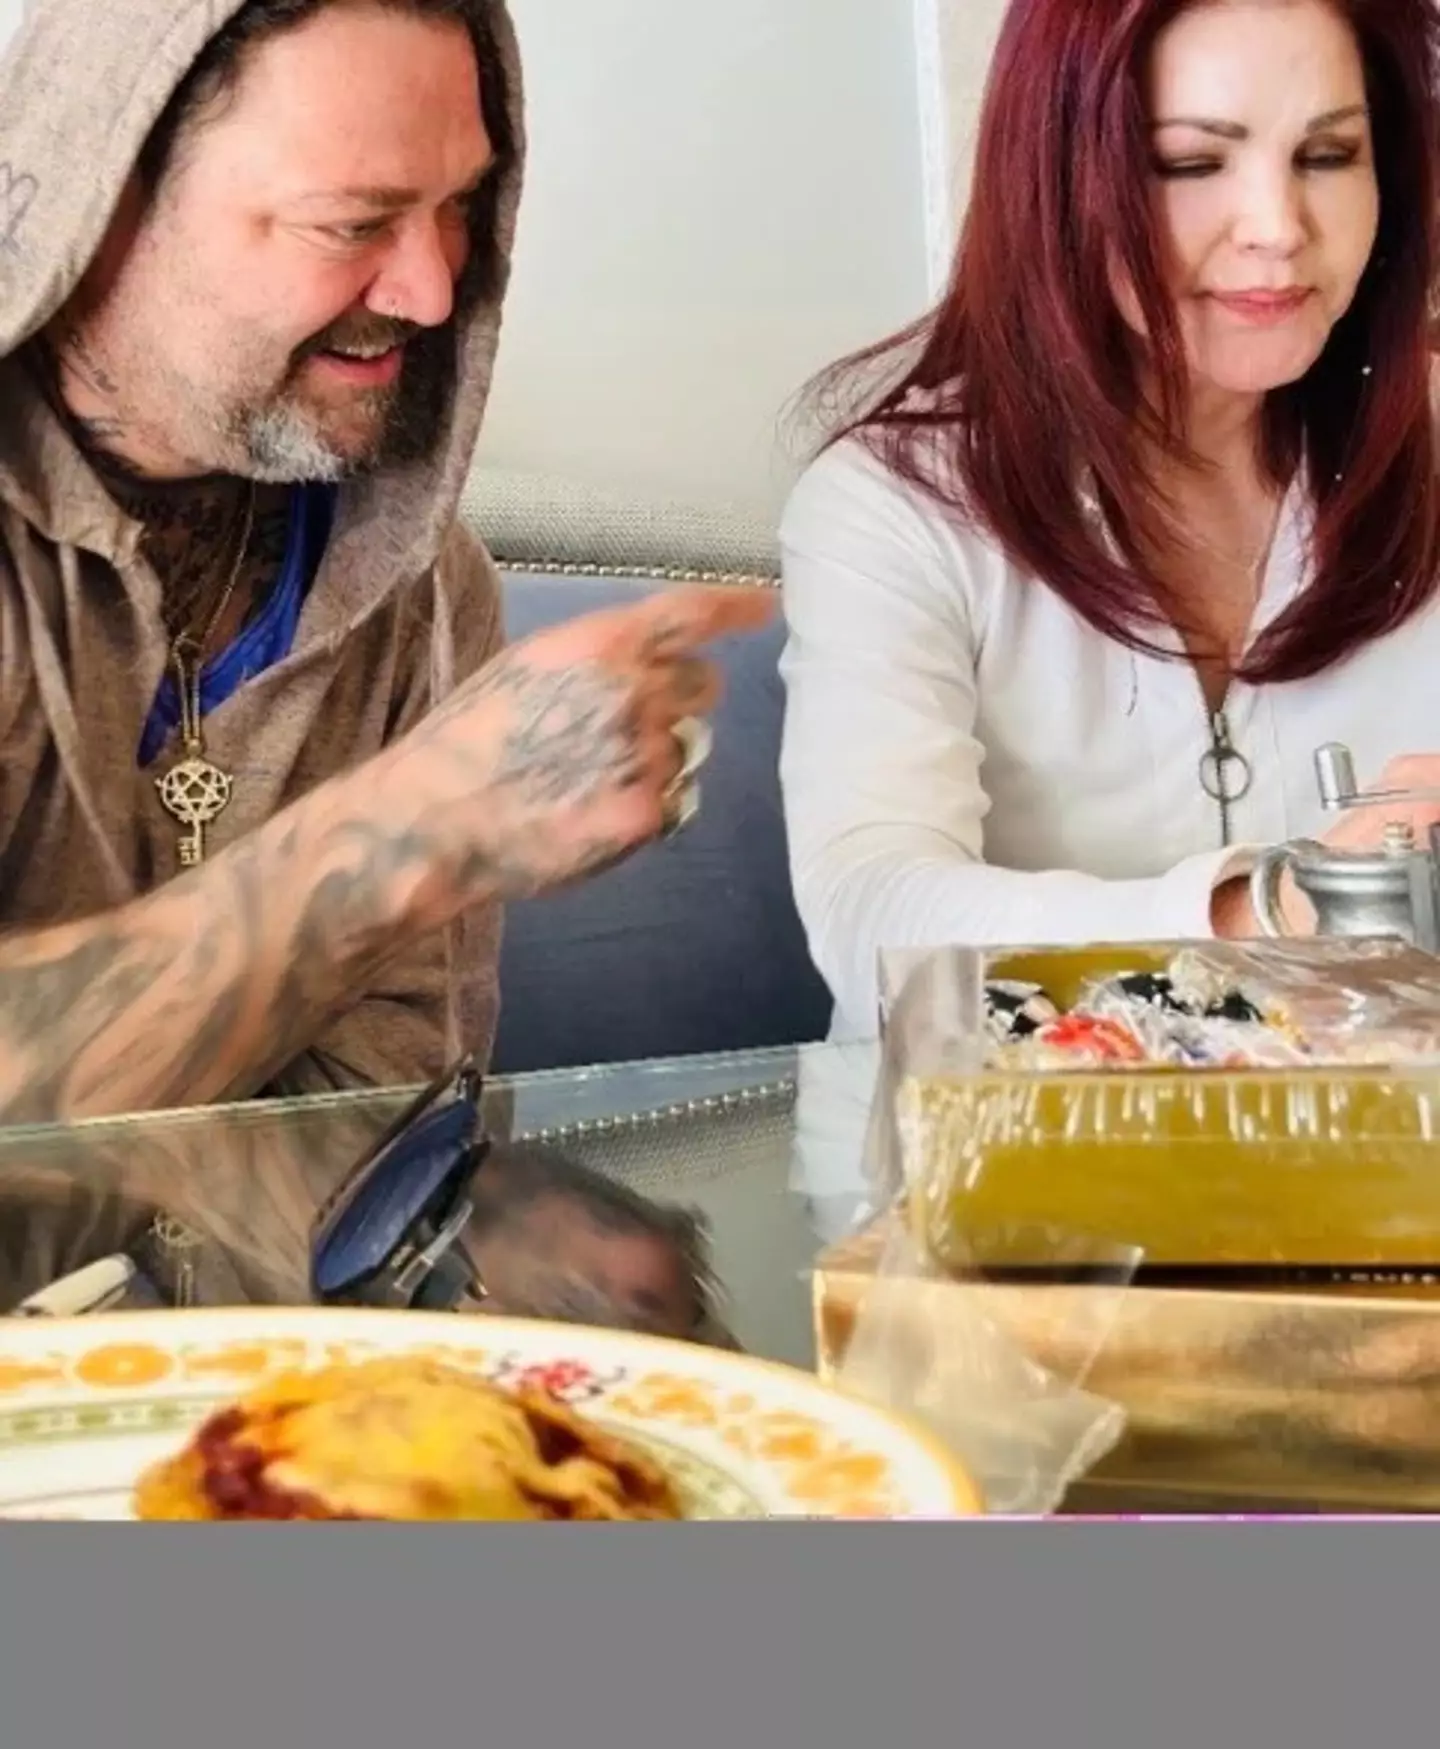 Priscilla Presley has hit out at Bam Margera's 'dishonest' interpretation of their recent get-together.